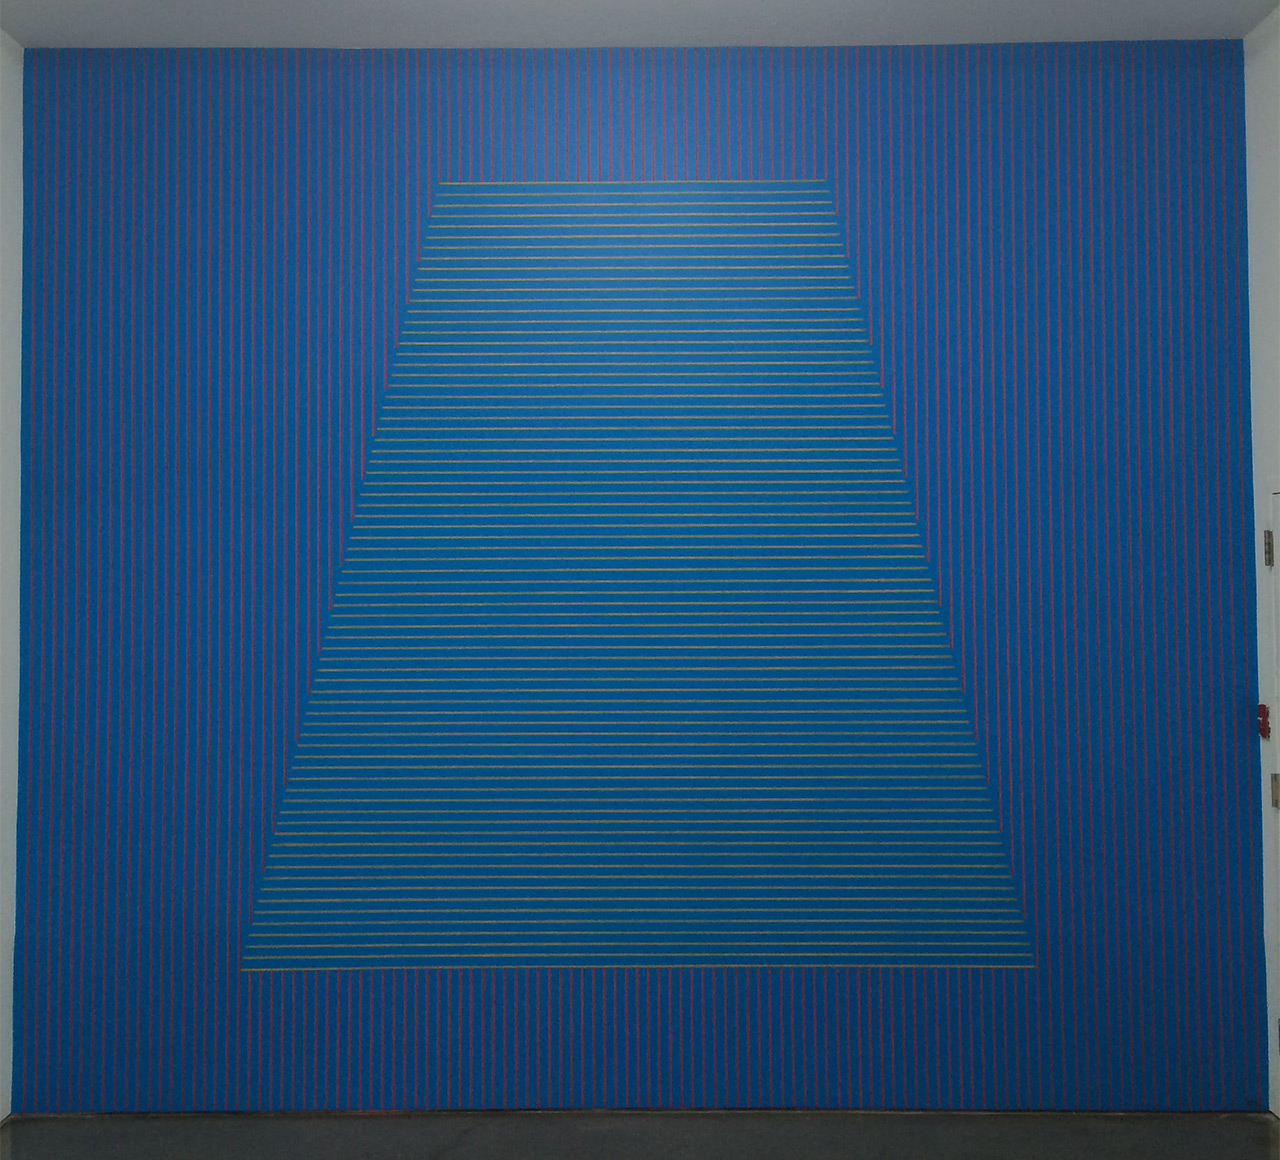 Sol LeWitt, "#333: On a blue wall, red vertical parallel lines, and in the center of the wall, a trapezoid within which are yellow horizontal parallel lines. The vertical lines do not enter the figure" (May 1980) at Gladstone Gallery